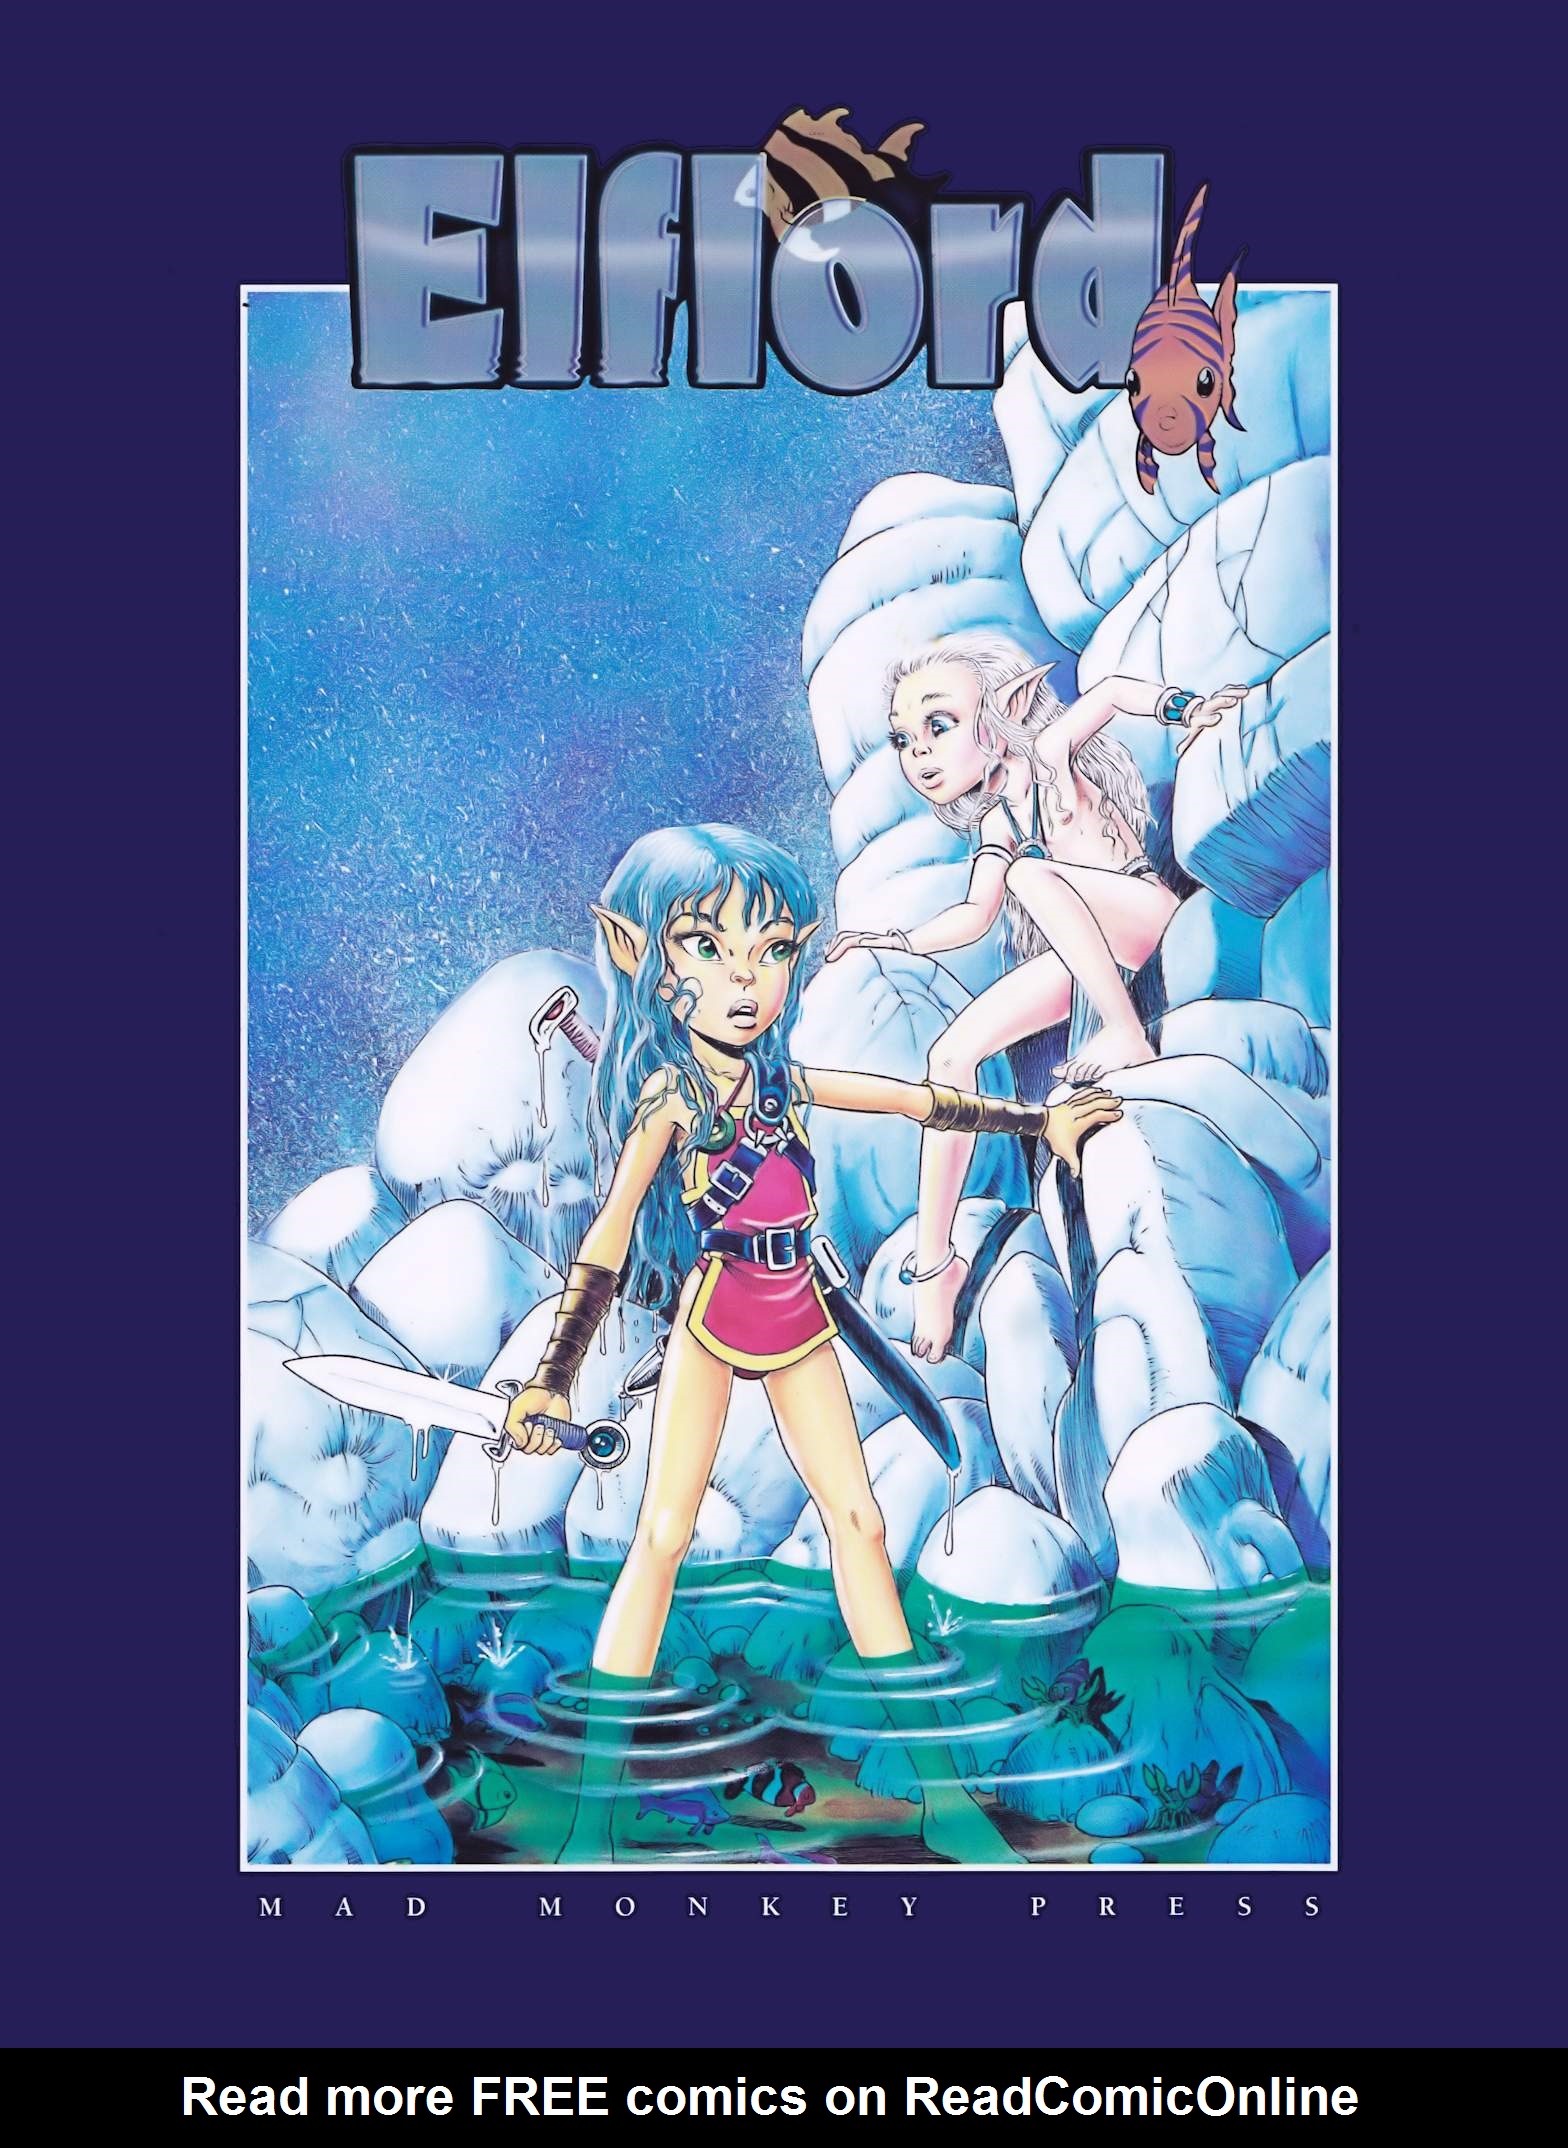 Read online Elflord comic -  Issue # Full - 1